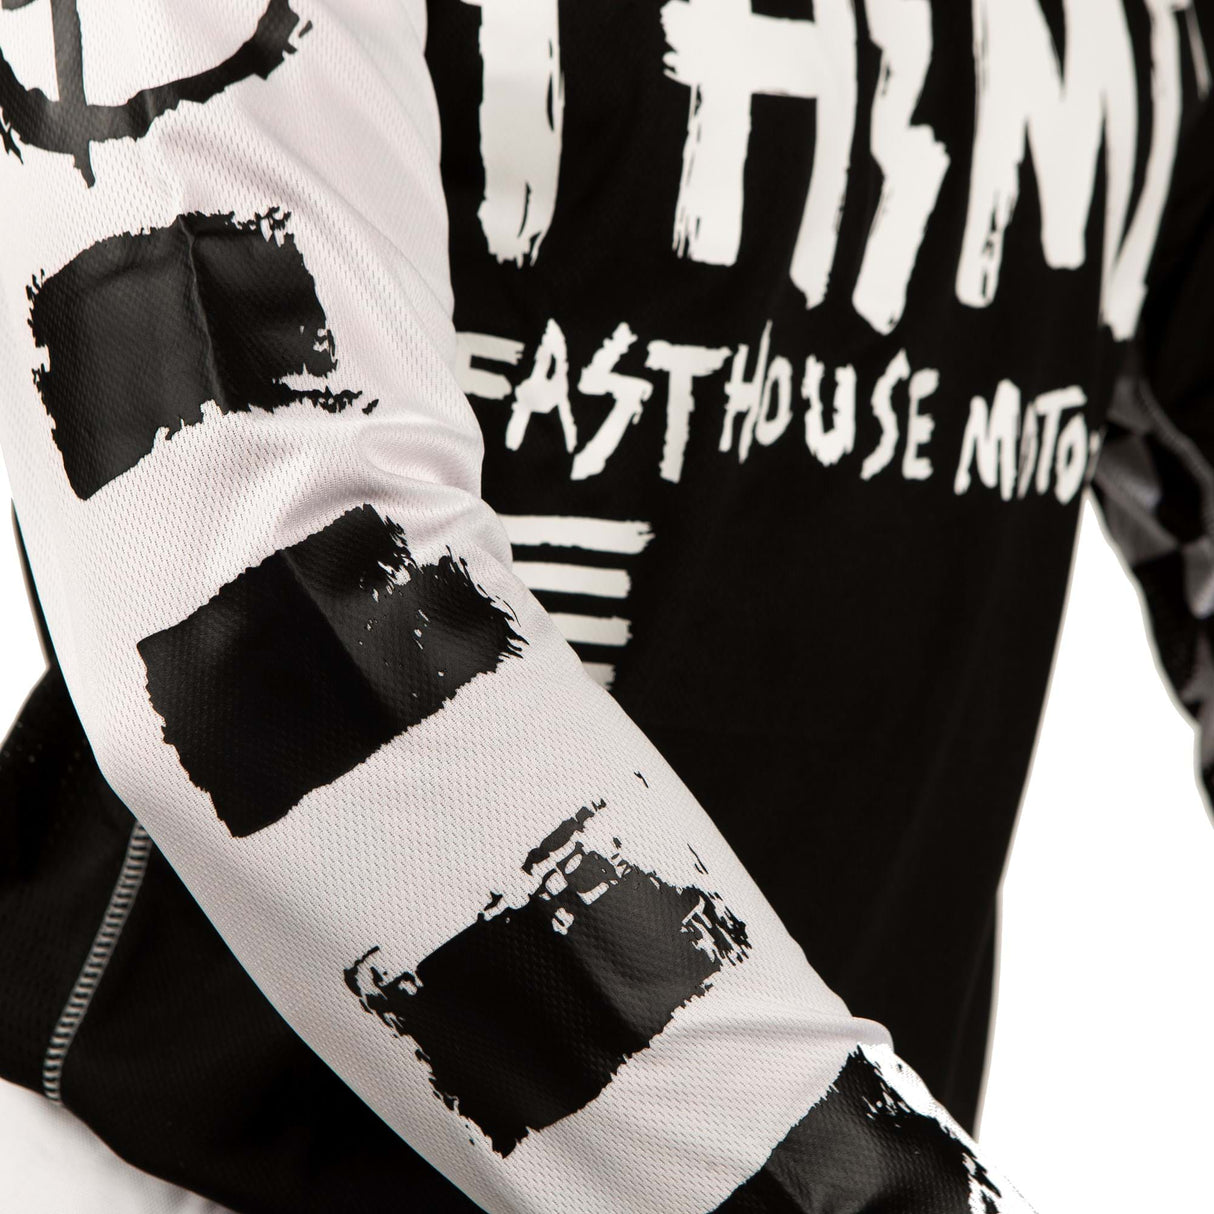 Fasthouse Youth Punk Long Sleeve Jersey